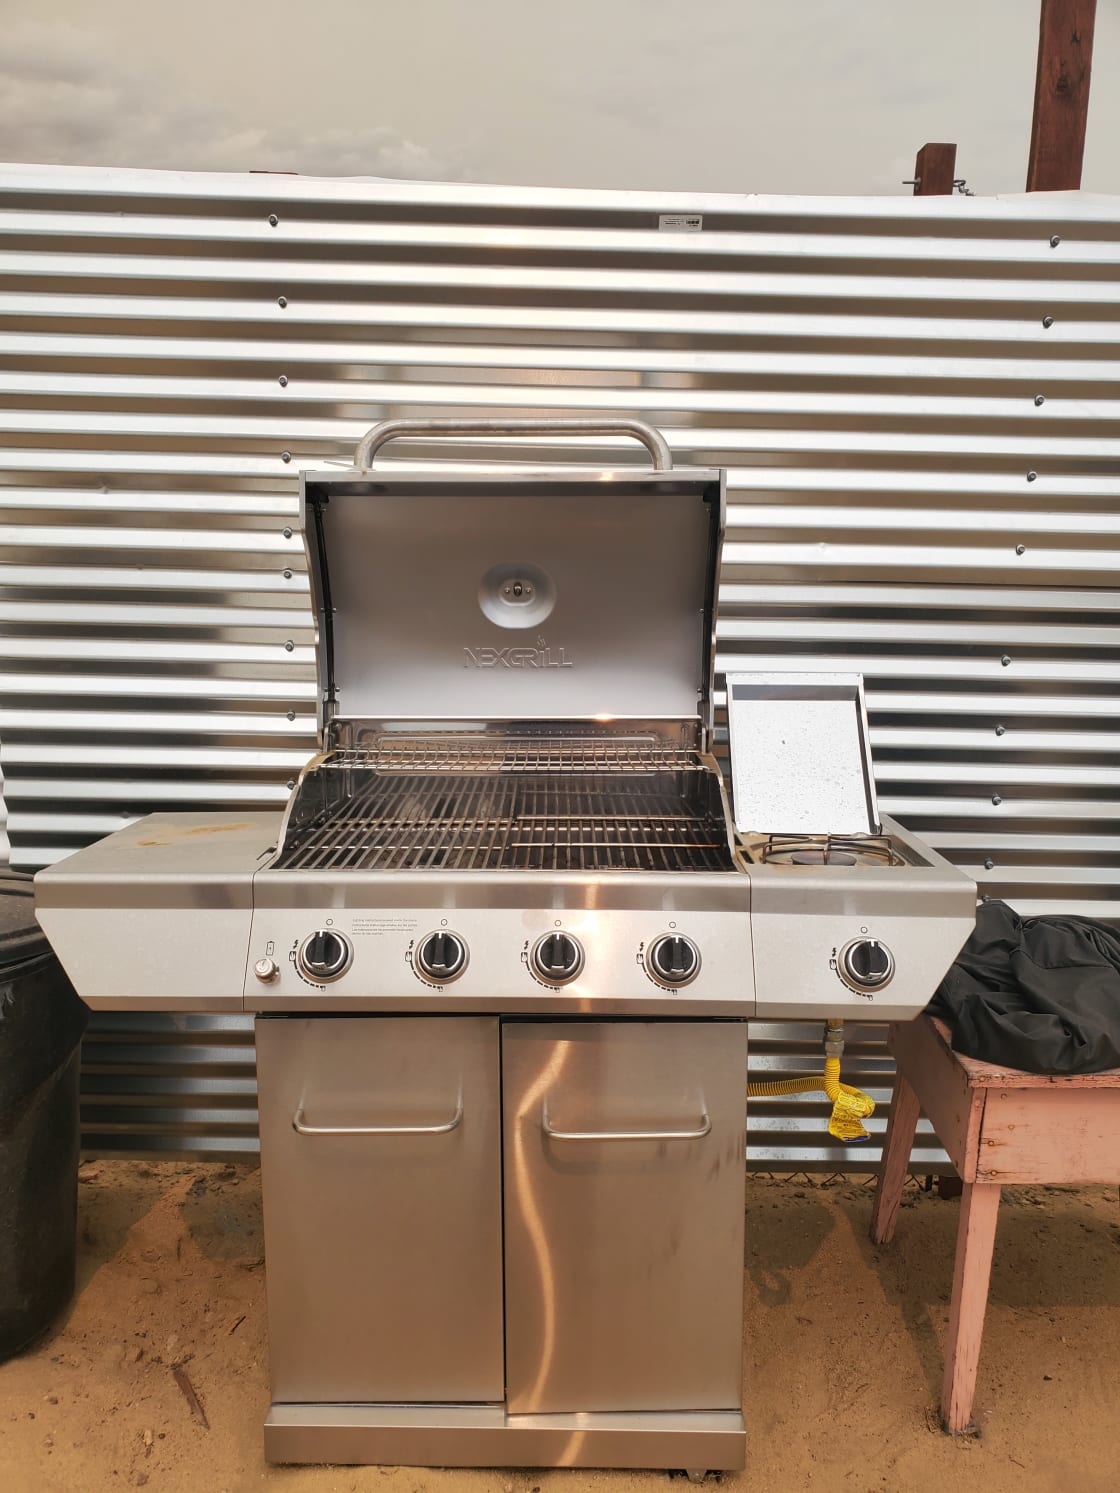 Gas grill for cooking